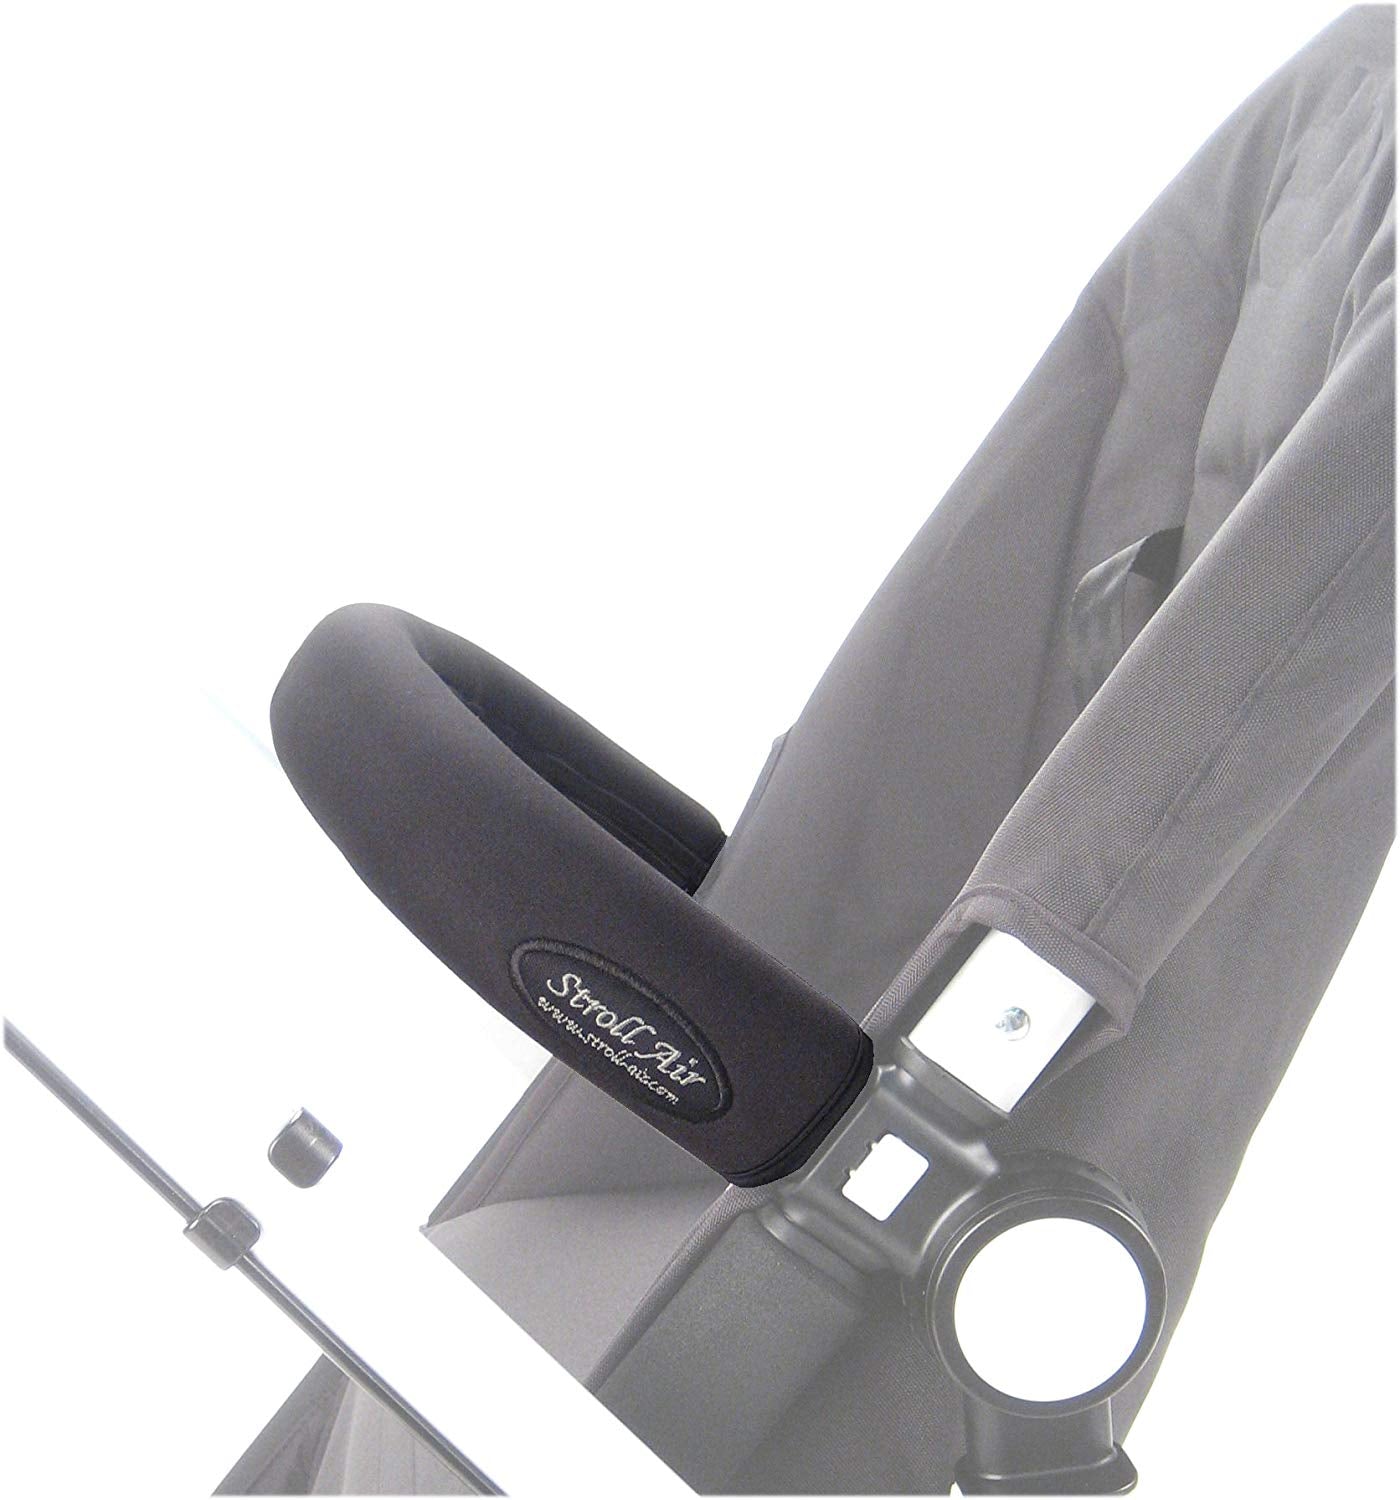 StrollAir 24 Inch Universal Stroller Handle Sleeve Cover - ANB Baby -$20 - $50